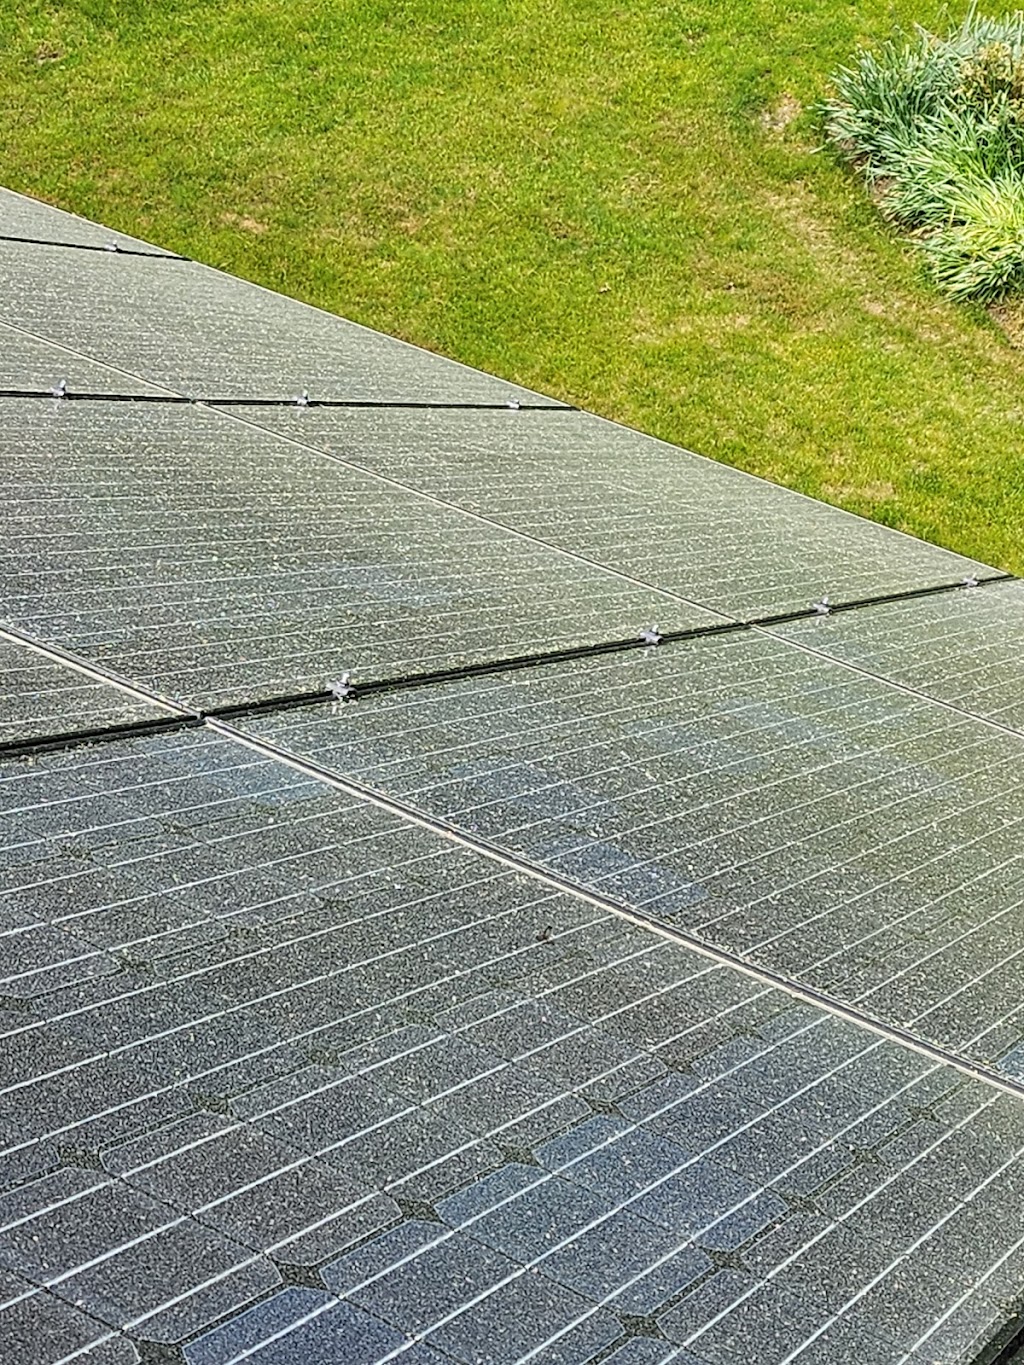 L & R Solar Panel Cleaning LLC | 191 Gold St, New Britain, CT 06053 | Phone: (407) 398-5512